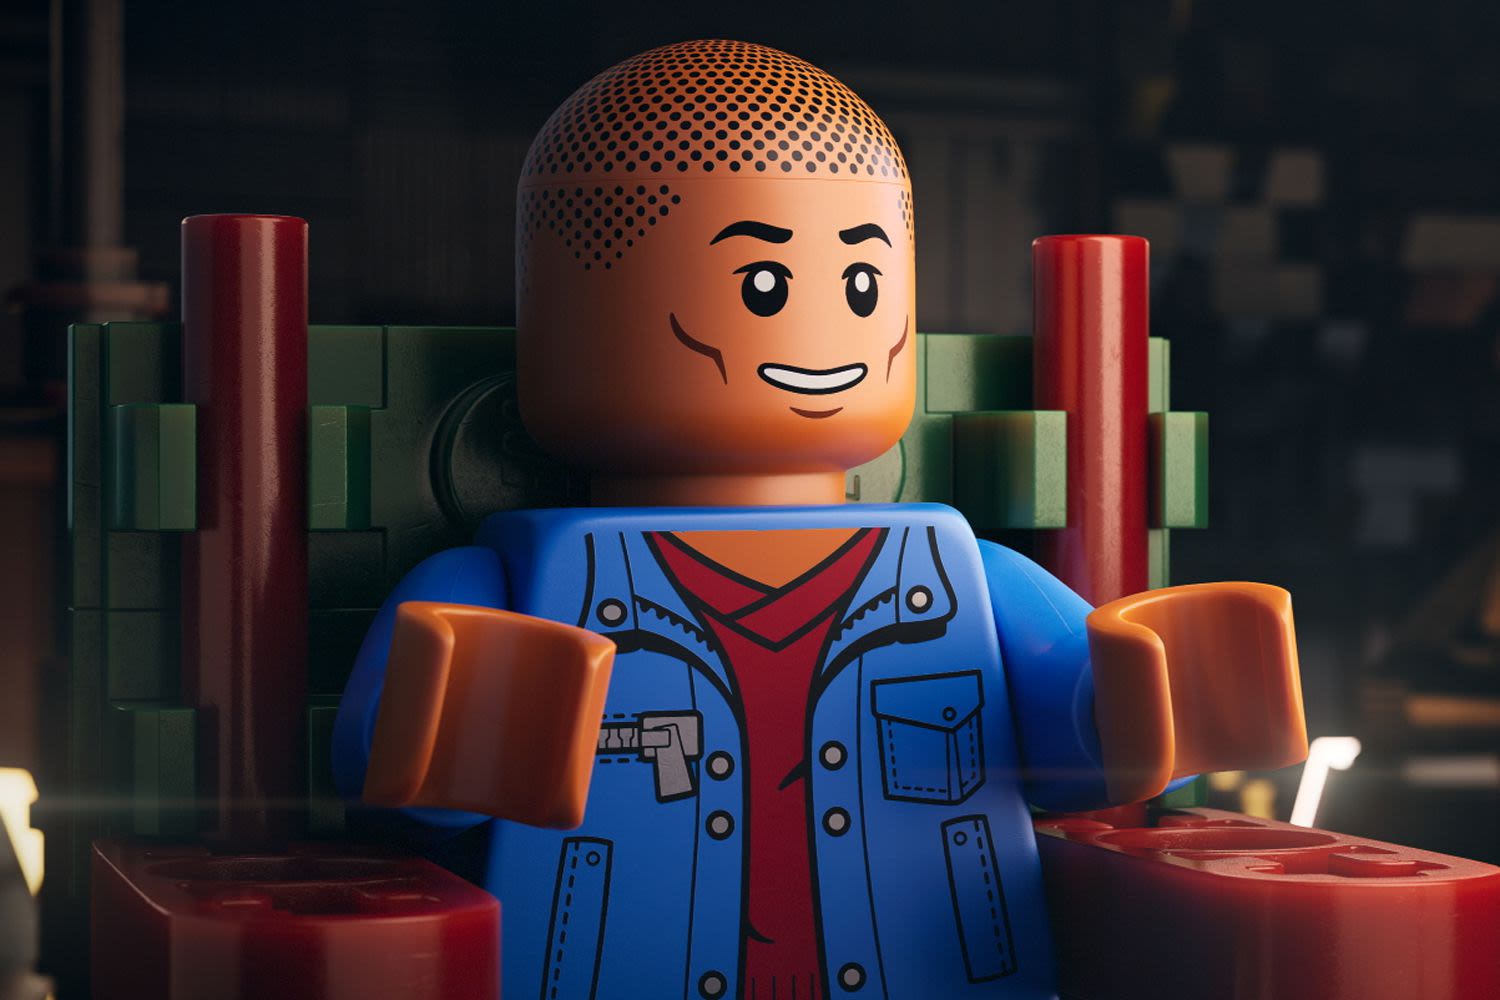 Pharrell Williams Tells His Life Story Through LEGO Animation in 'Piece by Piece' Trailer